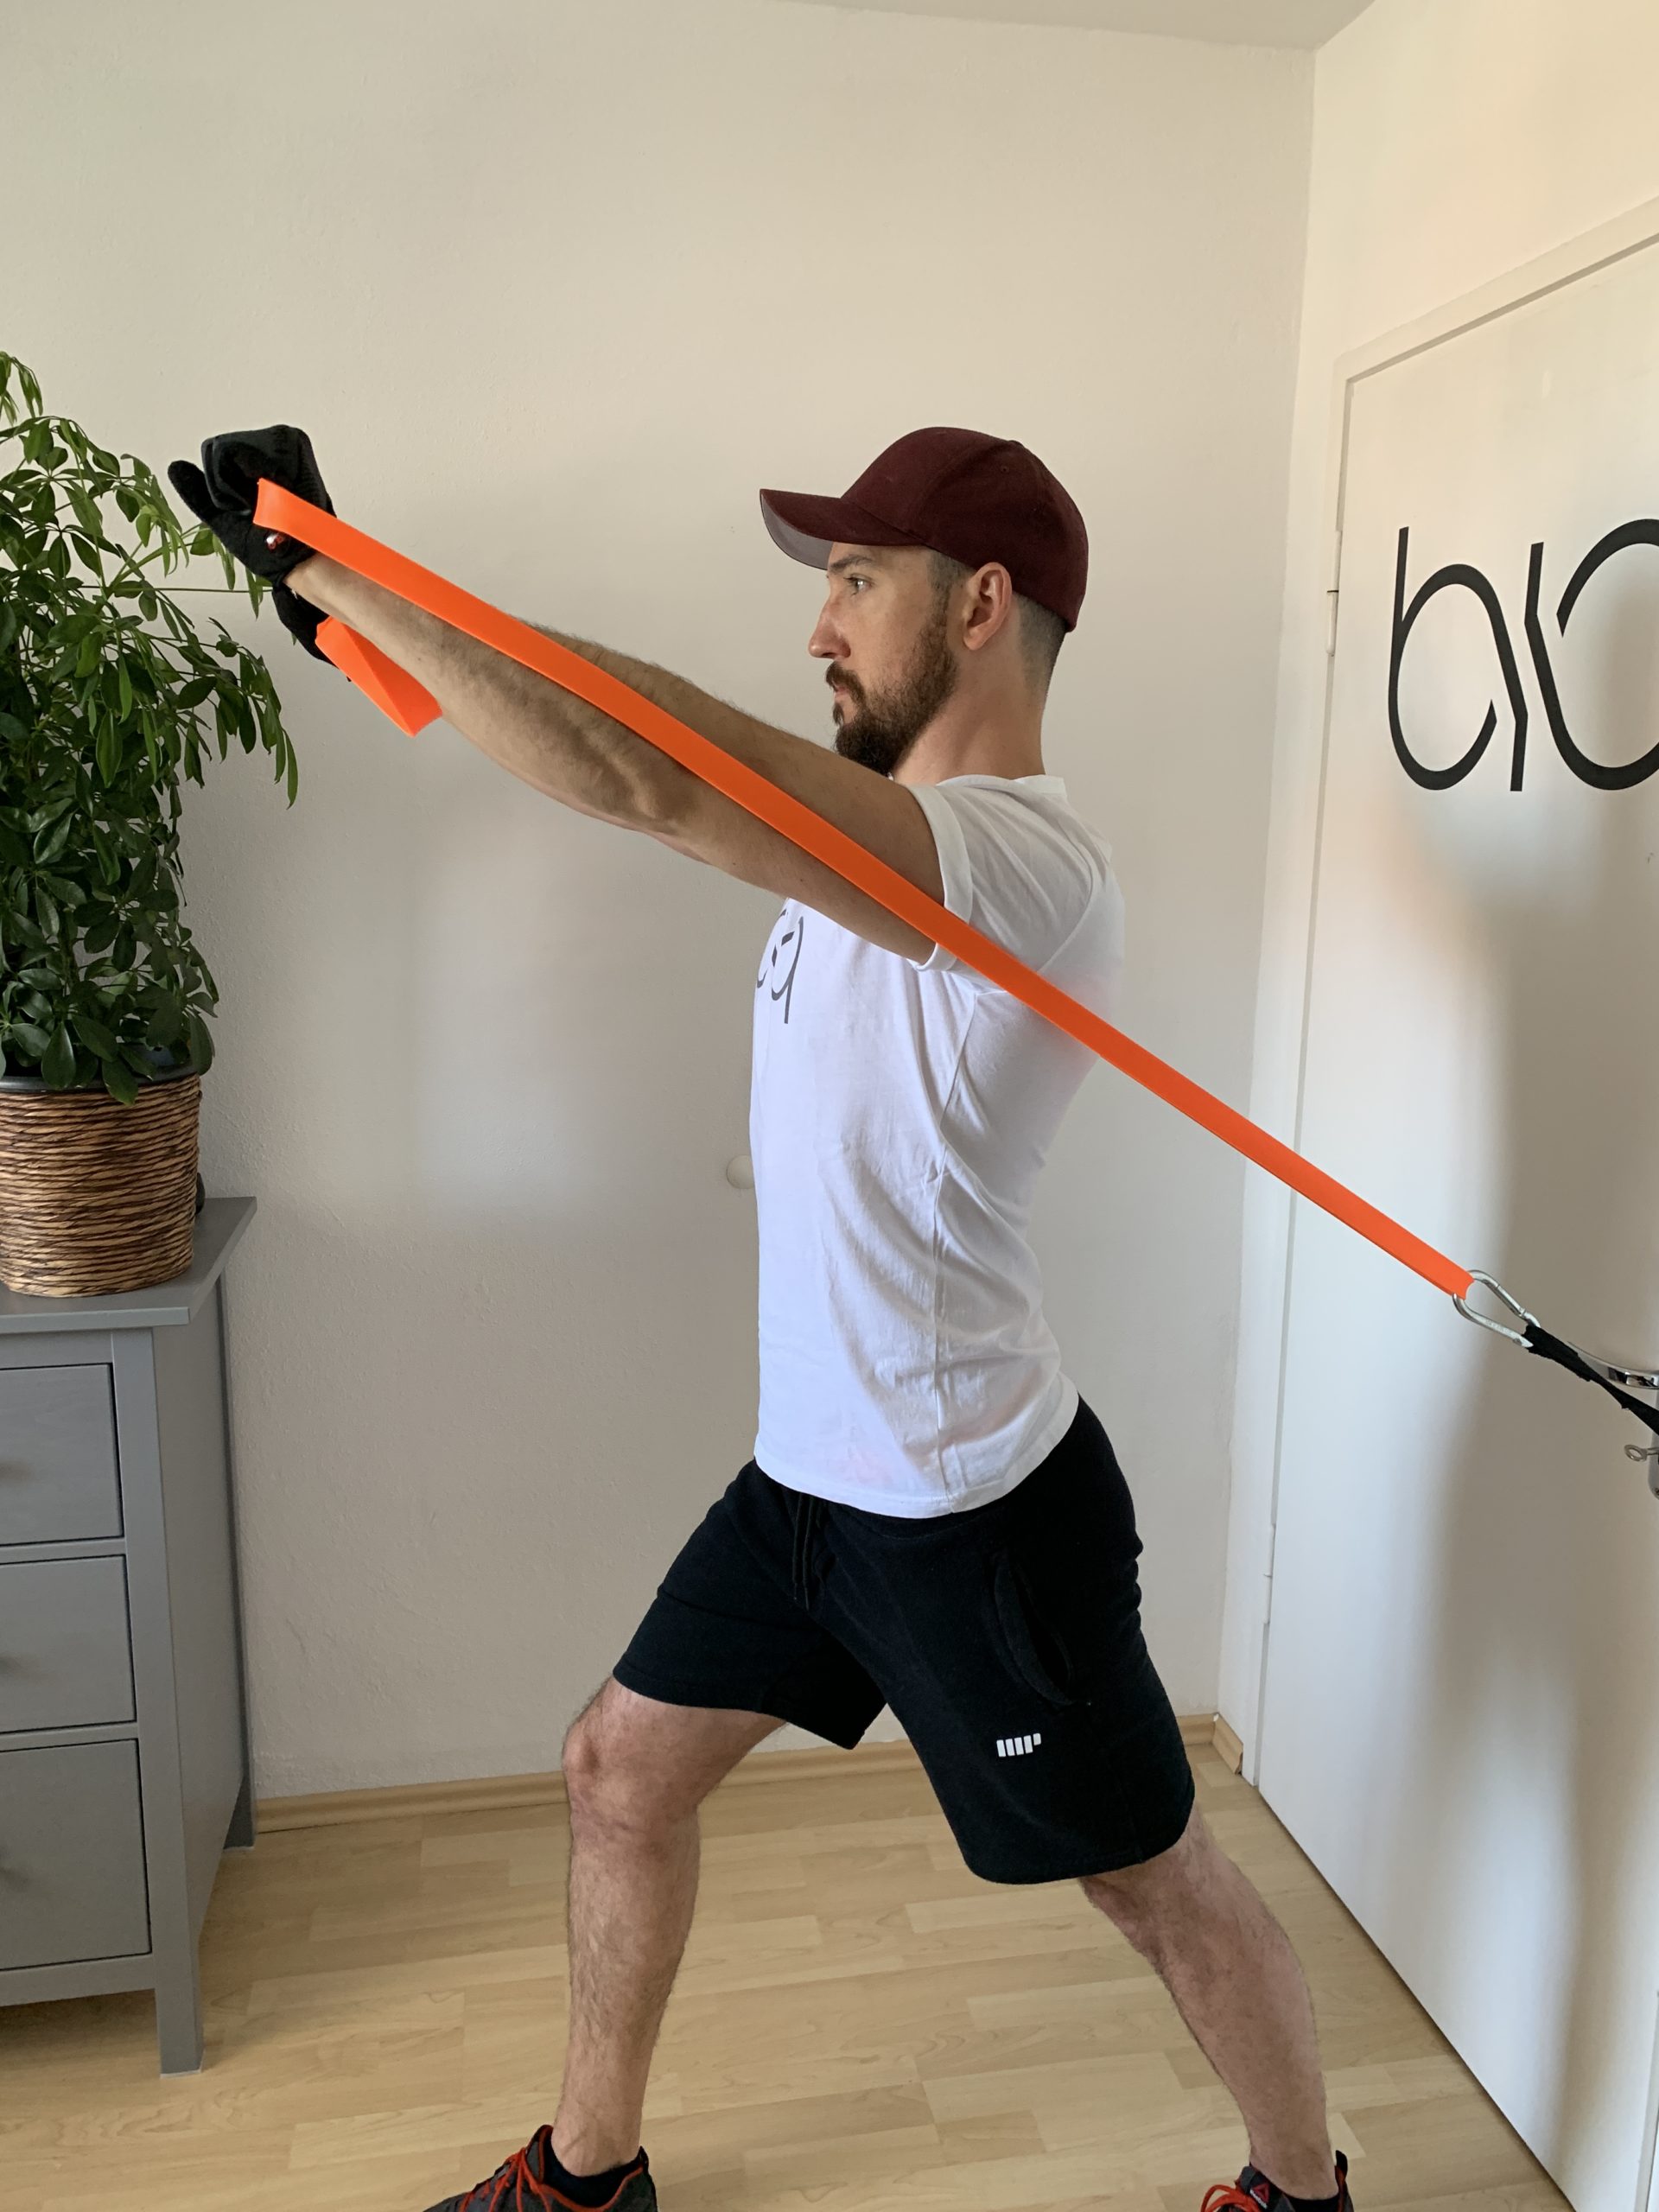 15 Minute Chest Exercises With Resistance Bands for Build Muscle